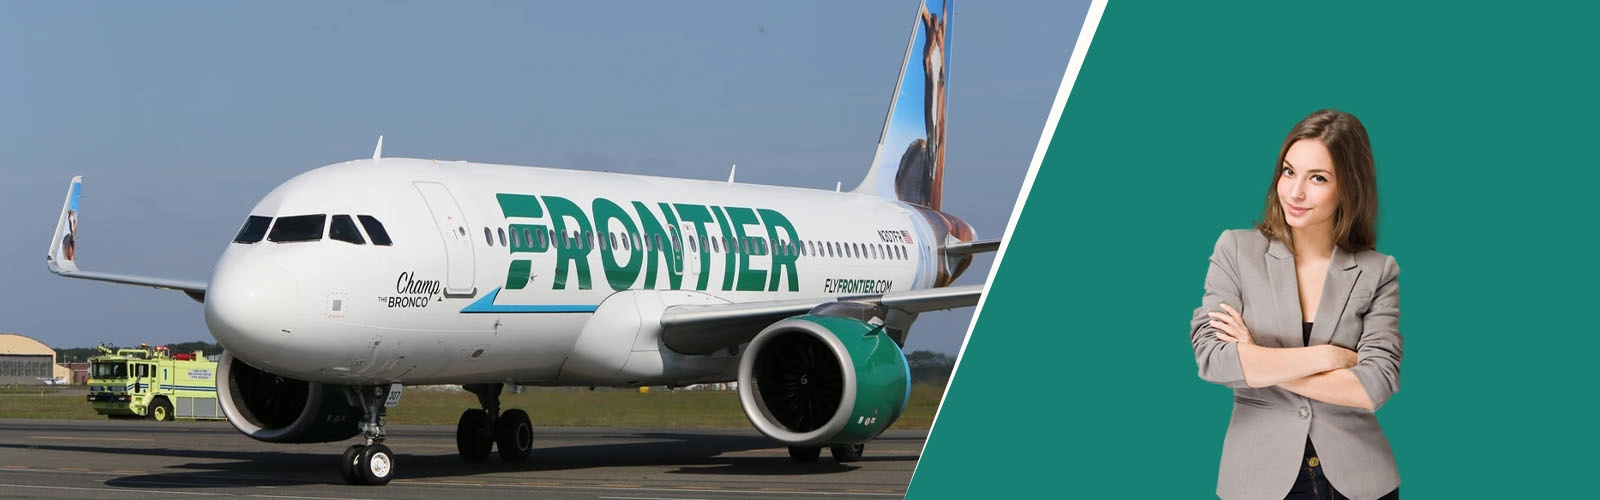 Frontier-Airlines-Customer-Service